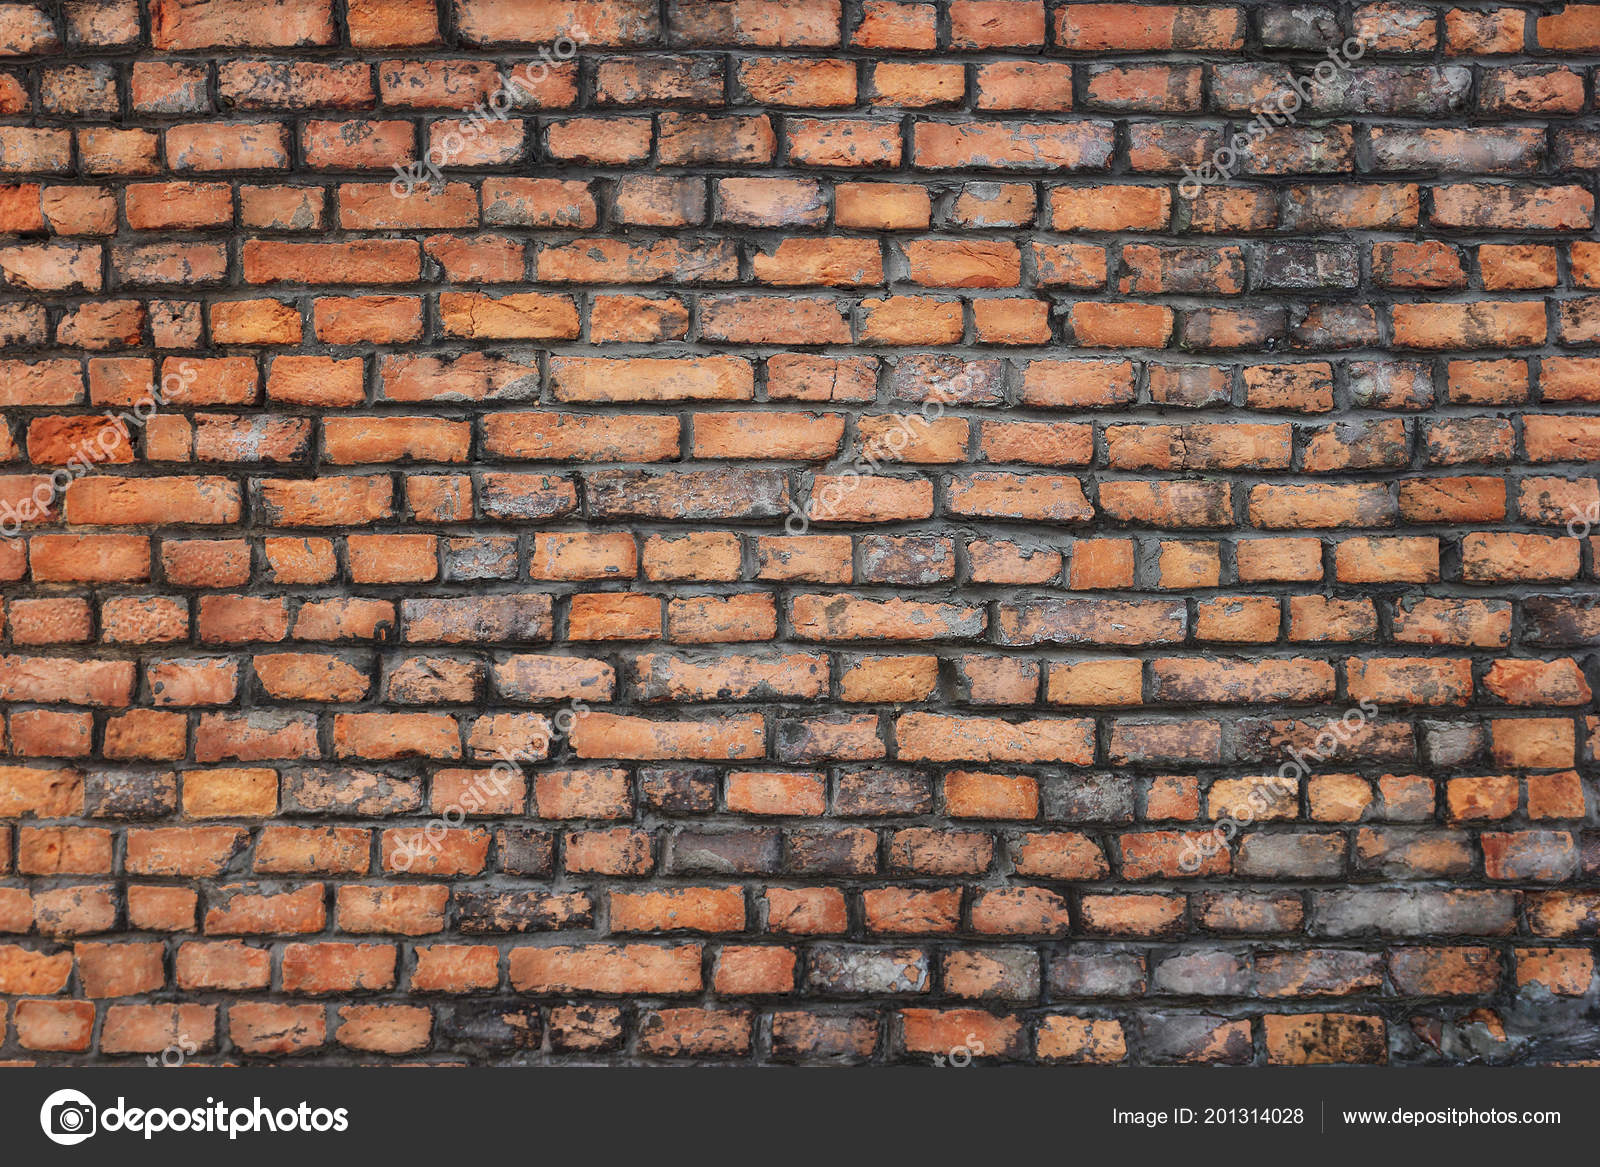 Wood Squares Wall Vintage Background Stock Photo by ©robertsrob 197586966